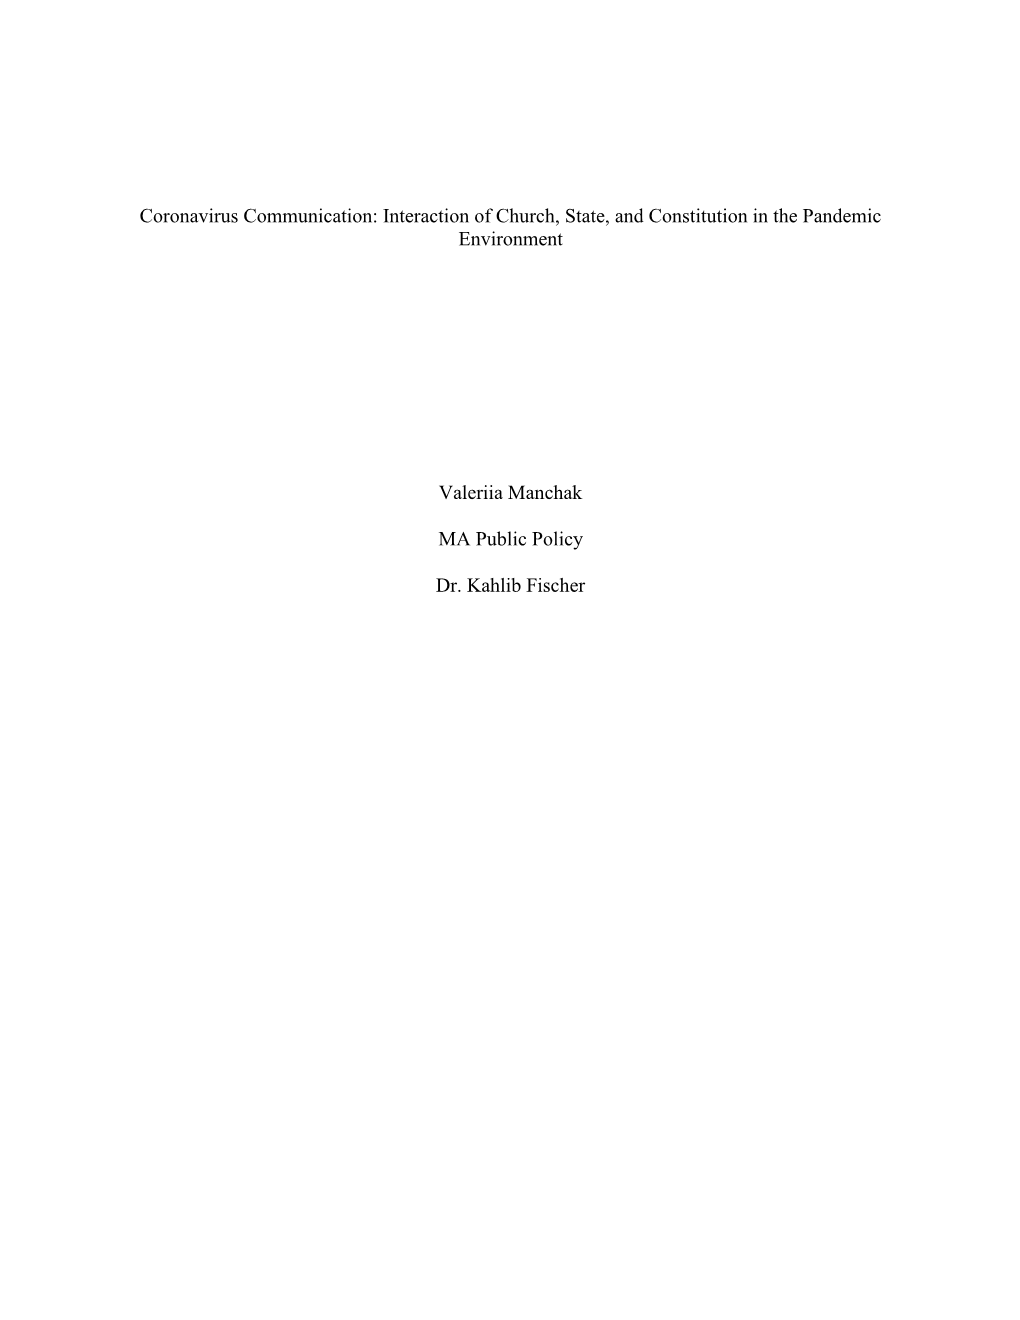 Interaction of Church, State, and Constitution in the Pandemic Environment Valeriia Manchak MA Public